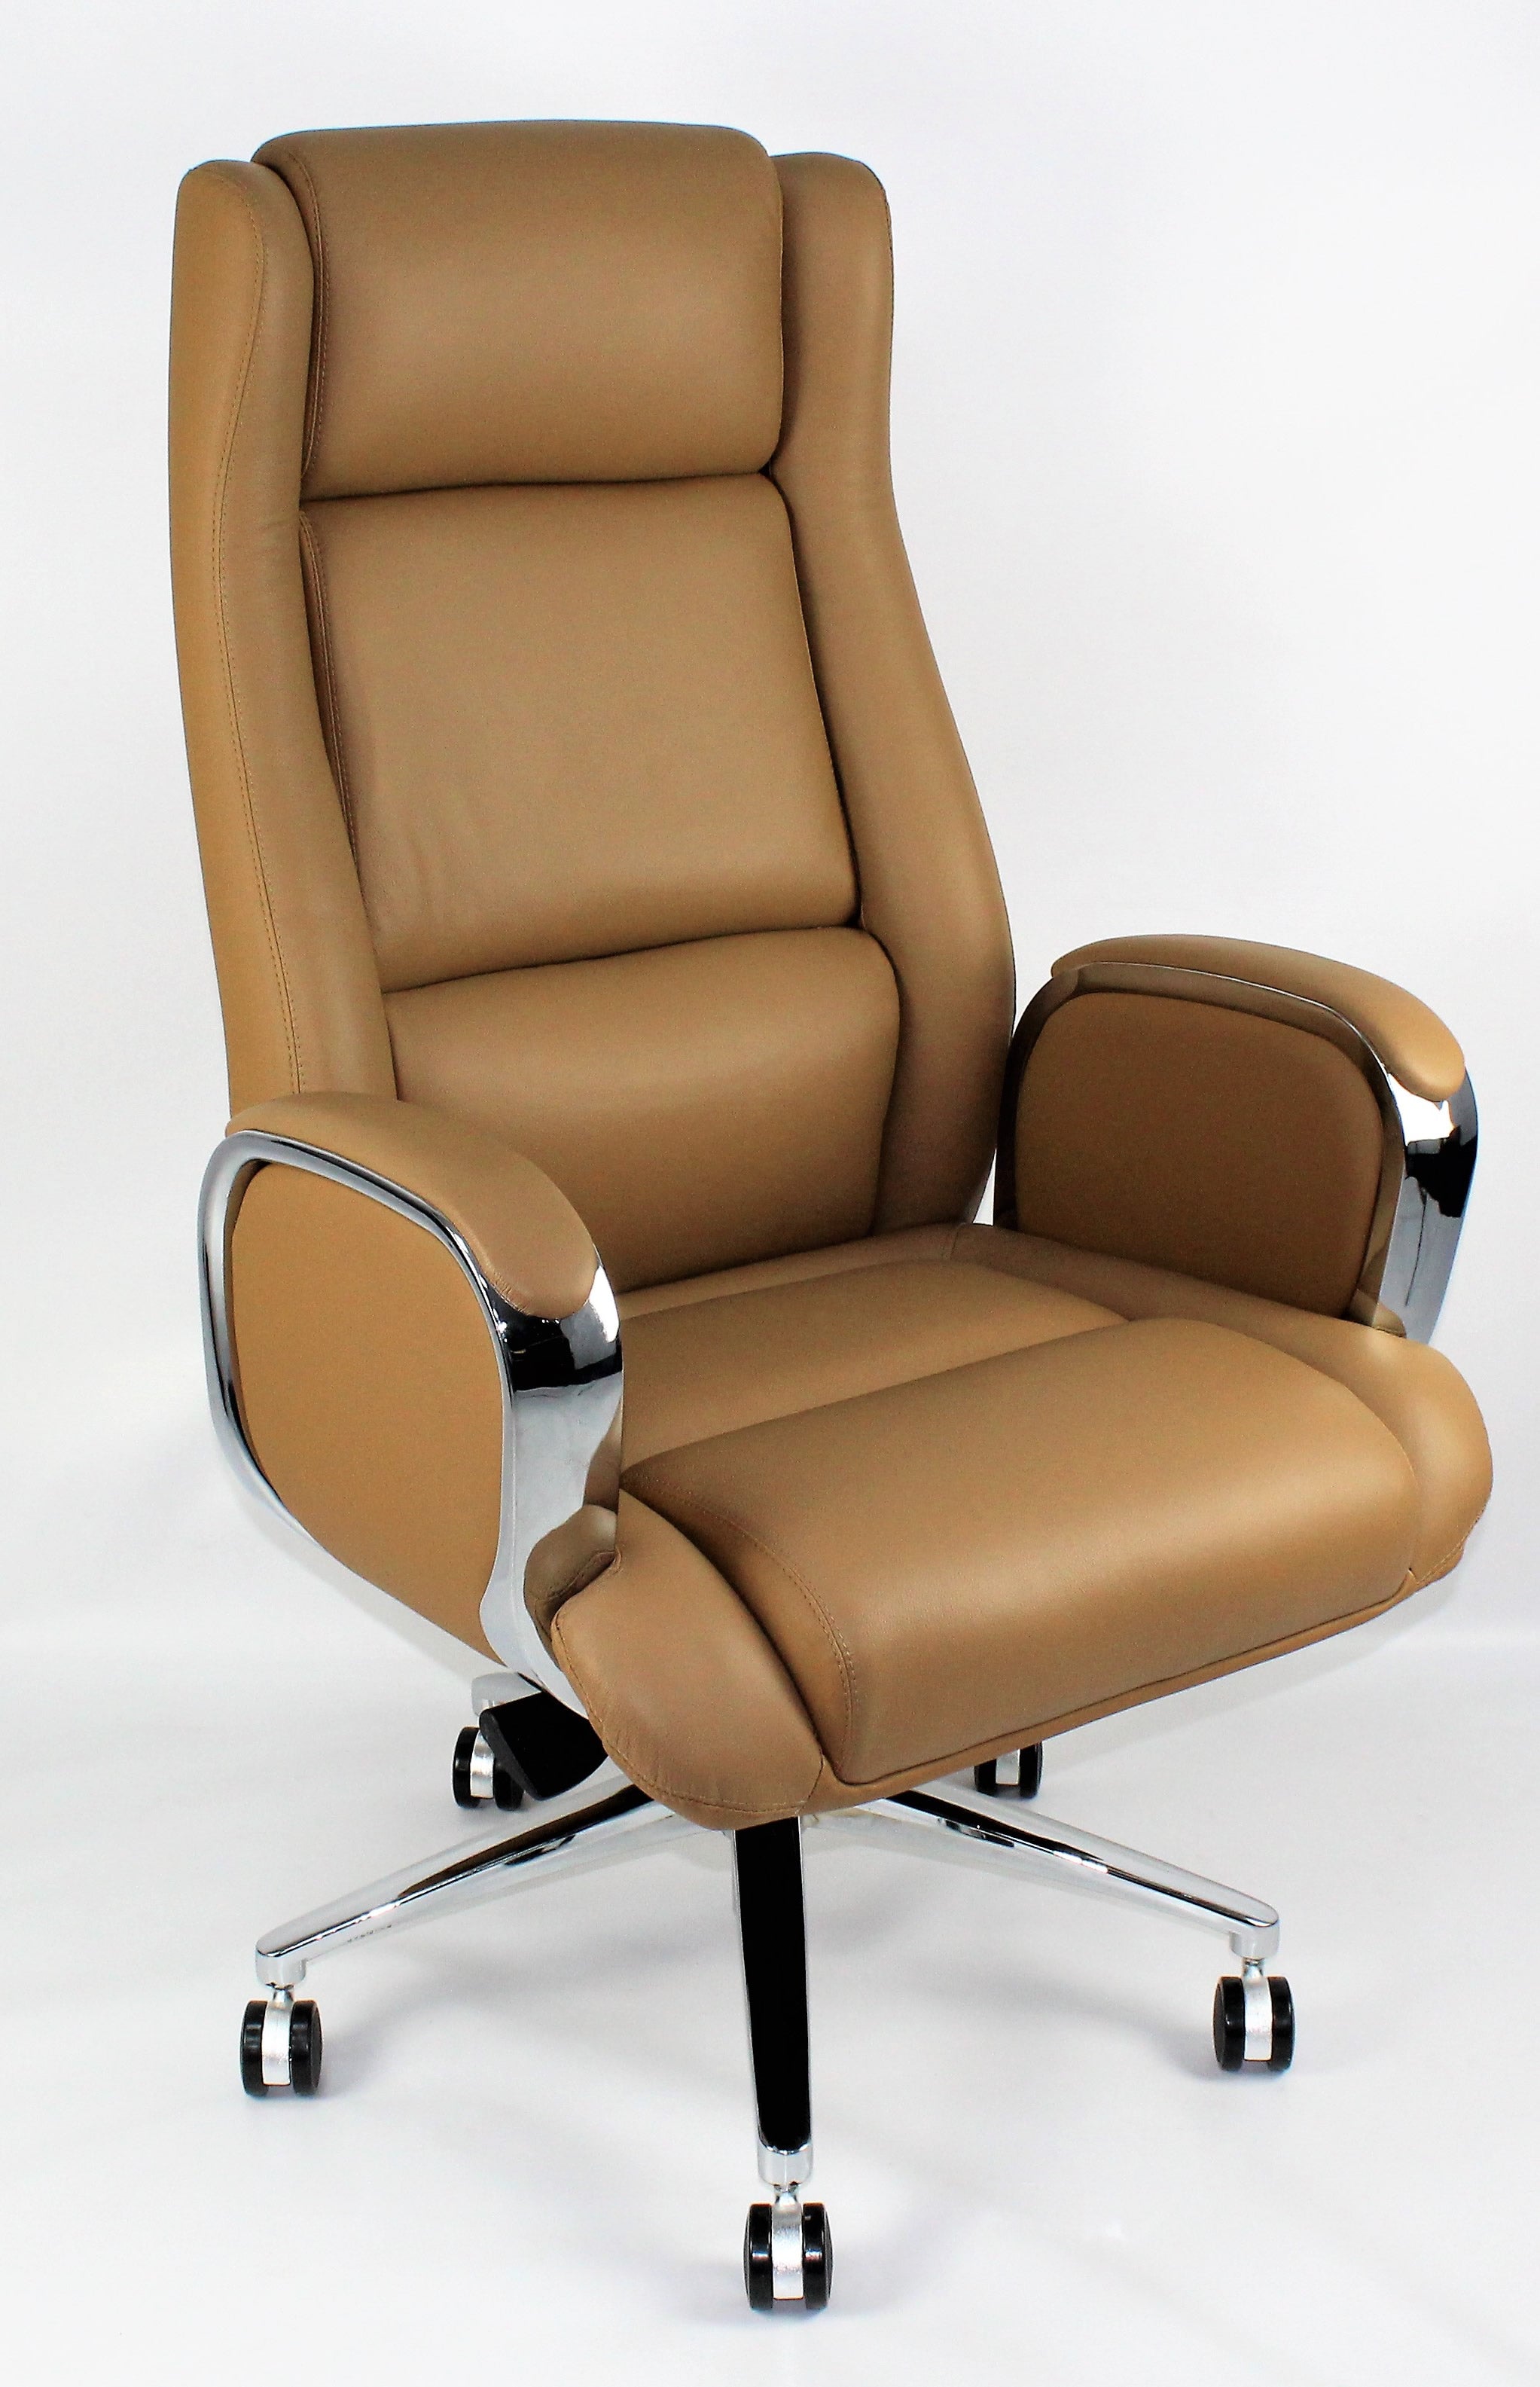 Beige Leather Executive Office Chair with Chrome Trimmed Arms - J1201 North Yorkshire